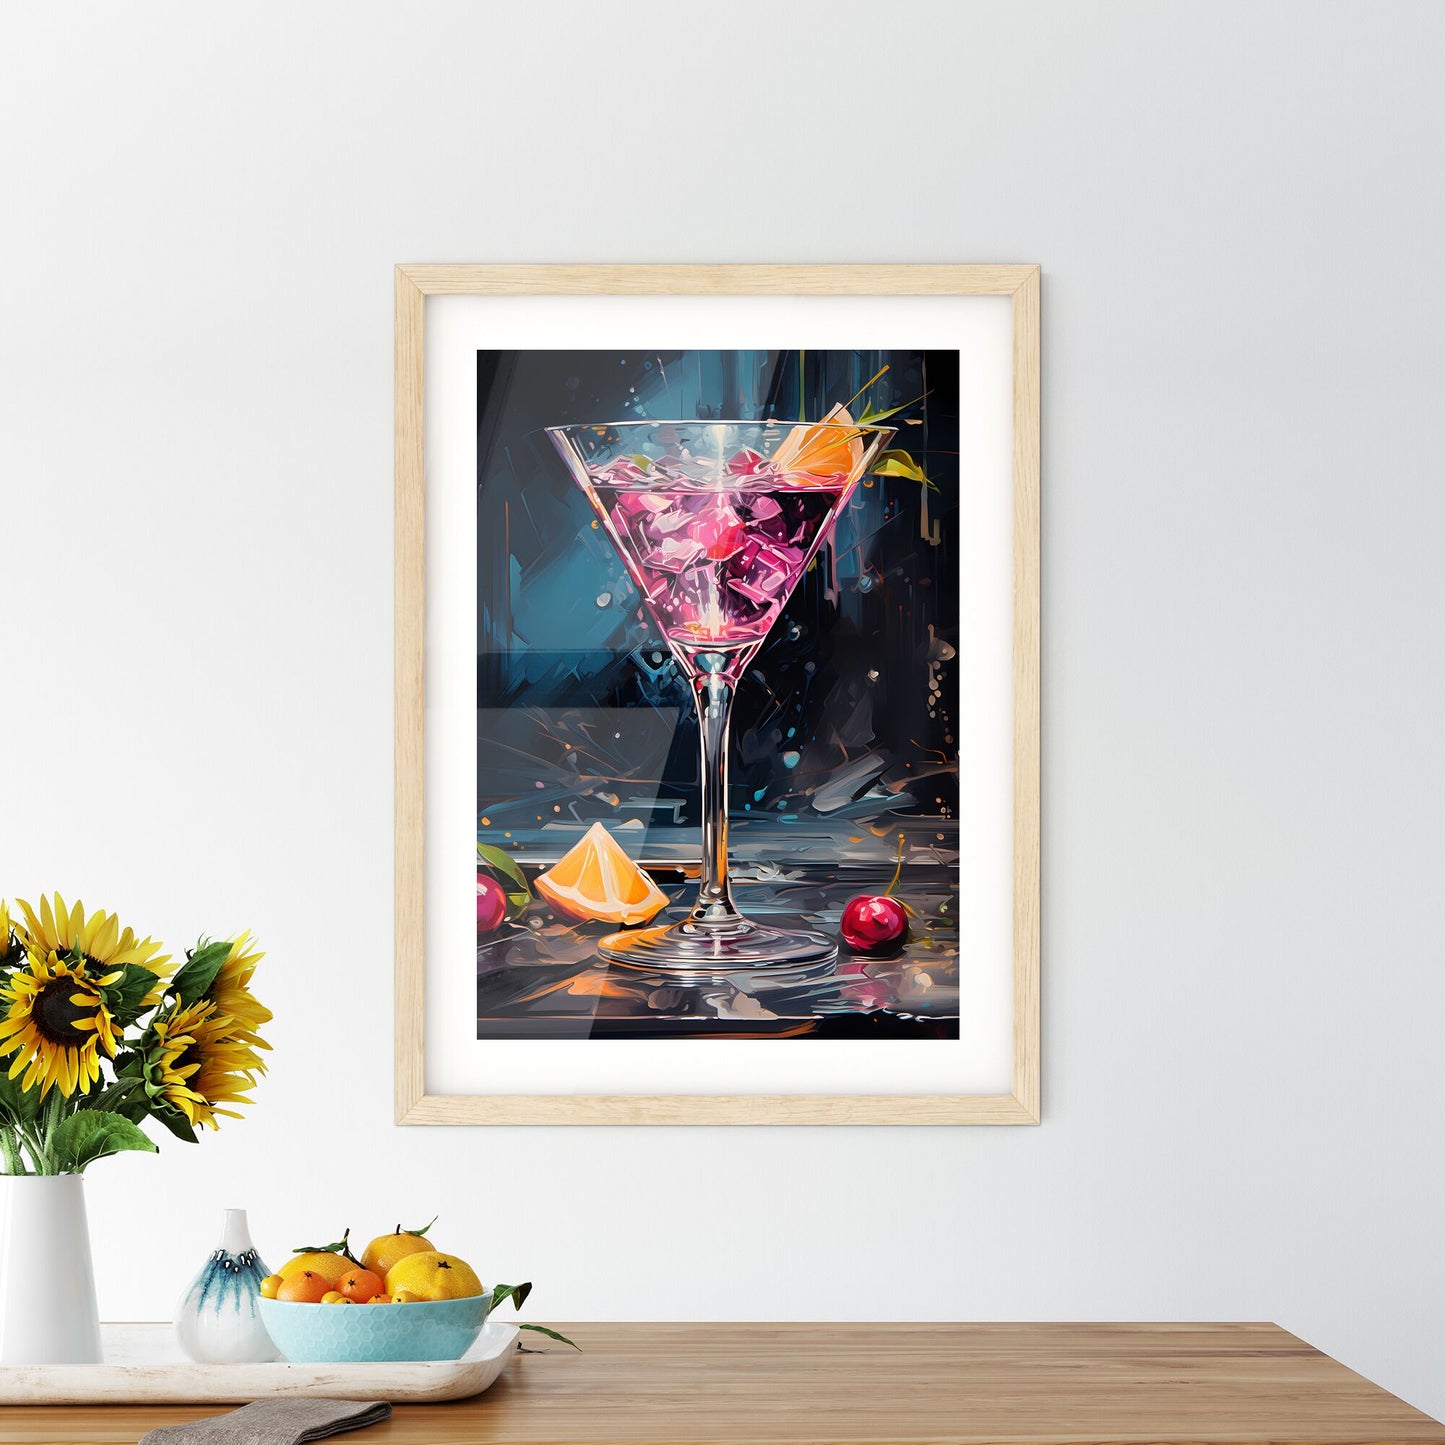 A Cosmopolitan Or Informally A Cosmo Cocktail - A Glass With A Drink And Fruit Default Title